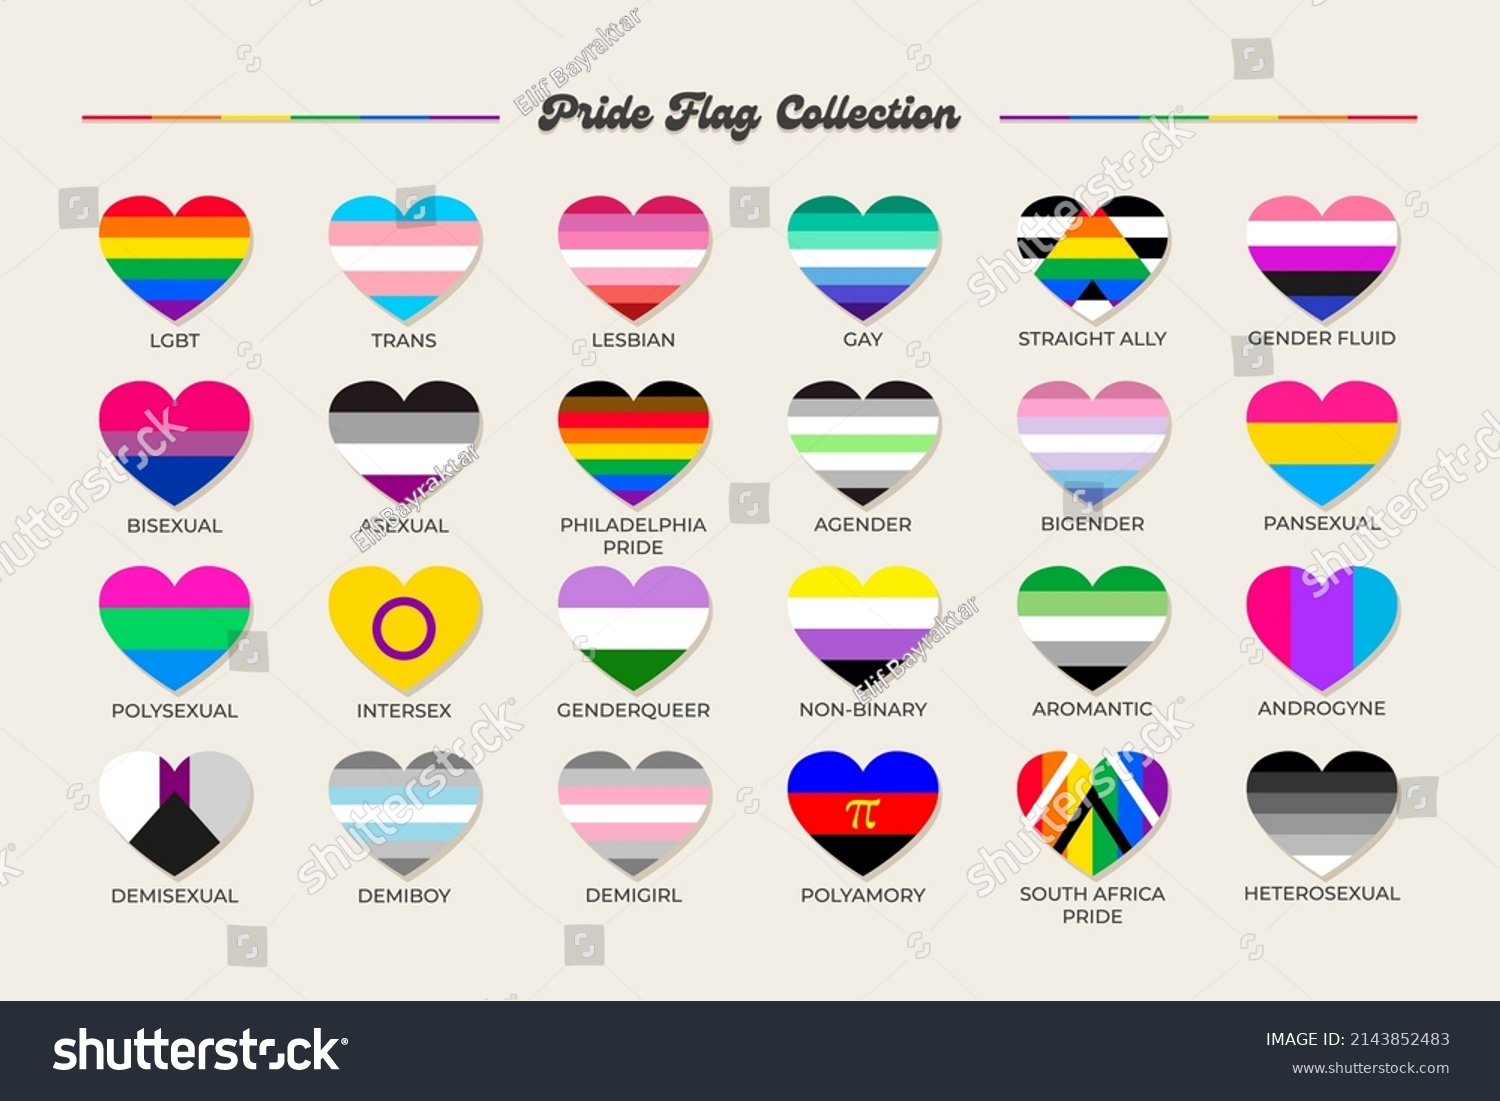 Lgbtq Sexual Identity Pride Flags Collection Stock Vector Royalty Free 2143852483